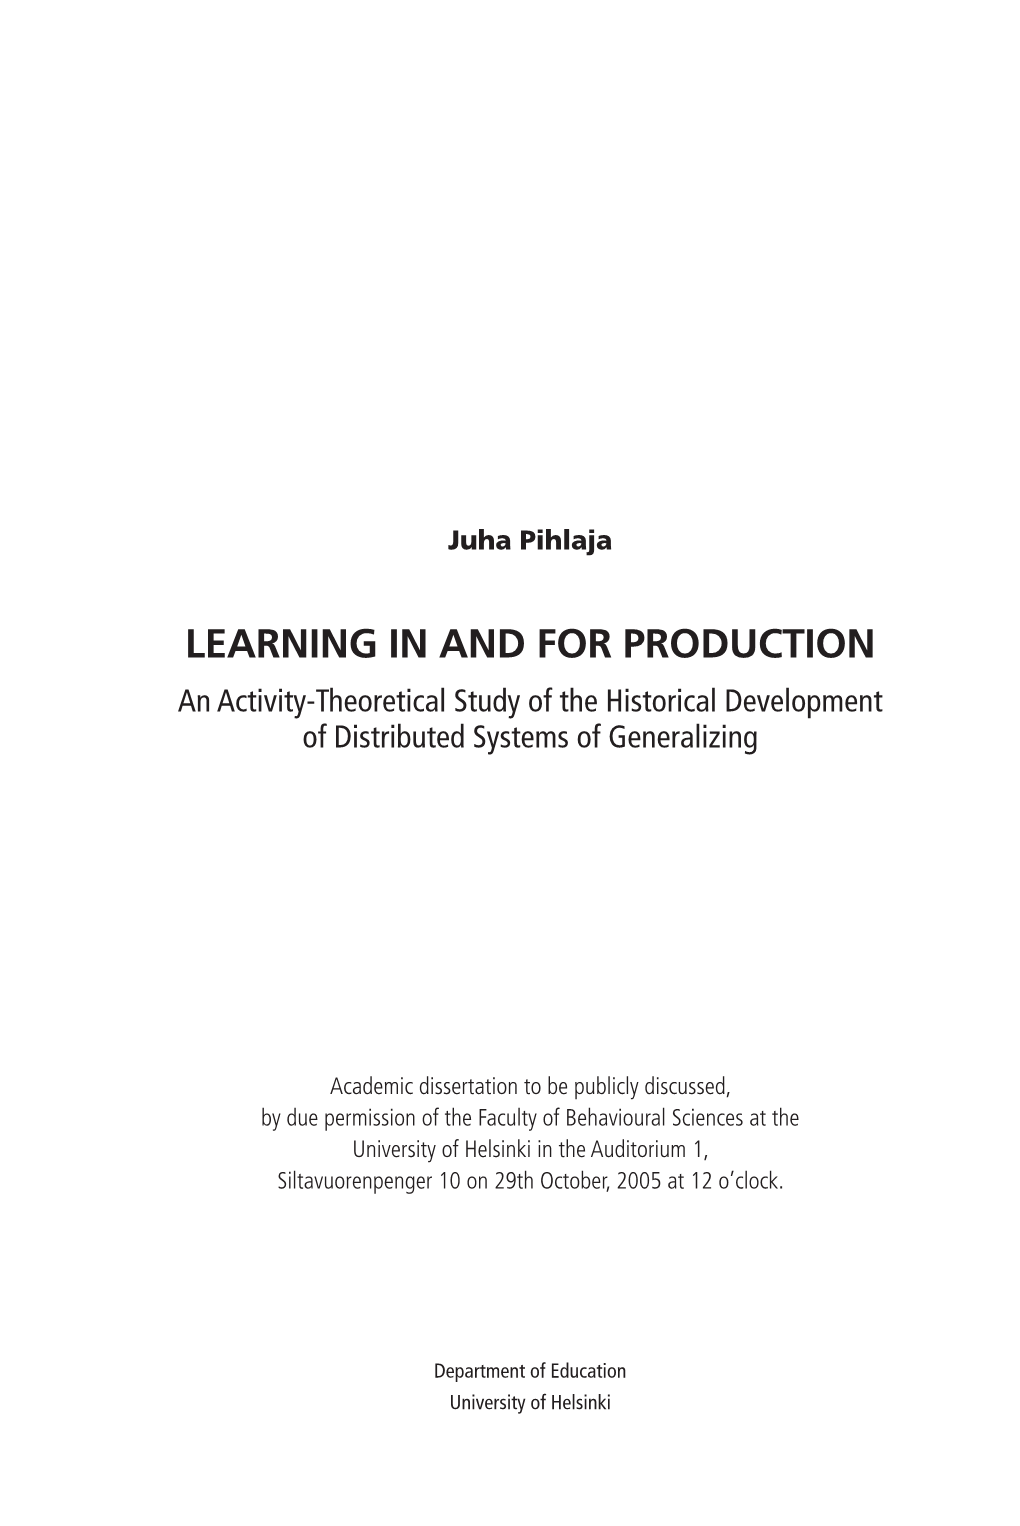 Learning in for Production. an Activity-Theoretical Study Of